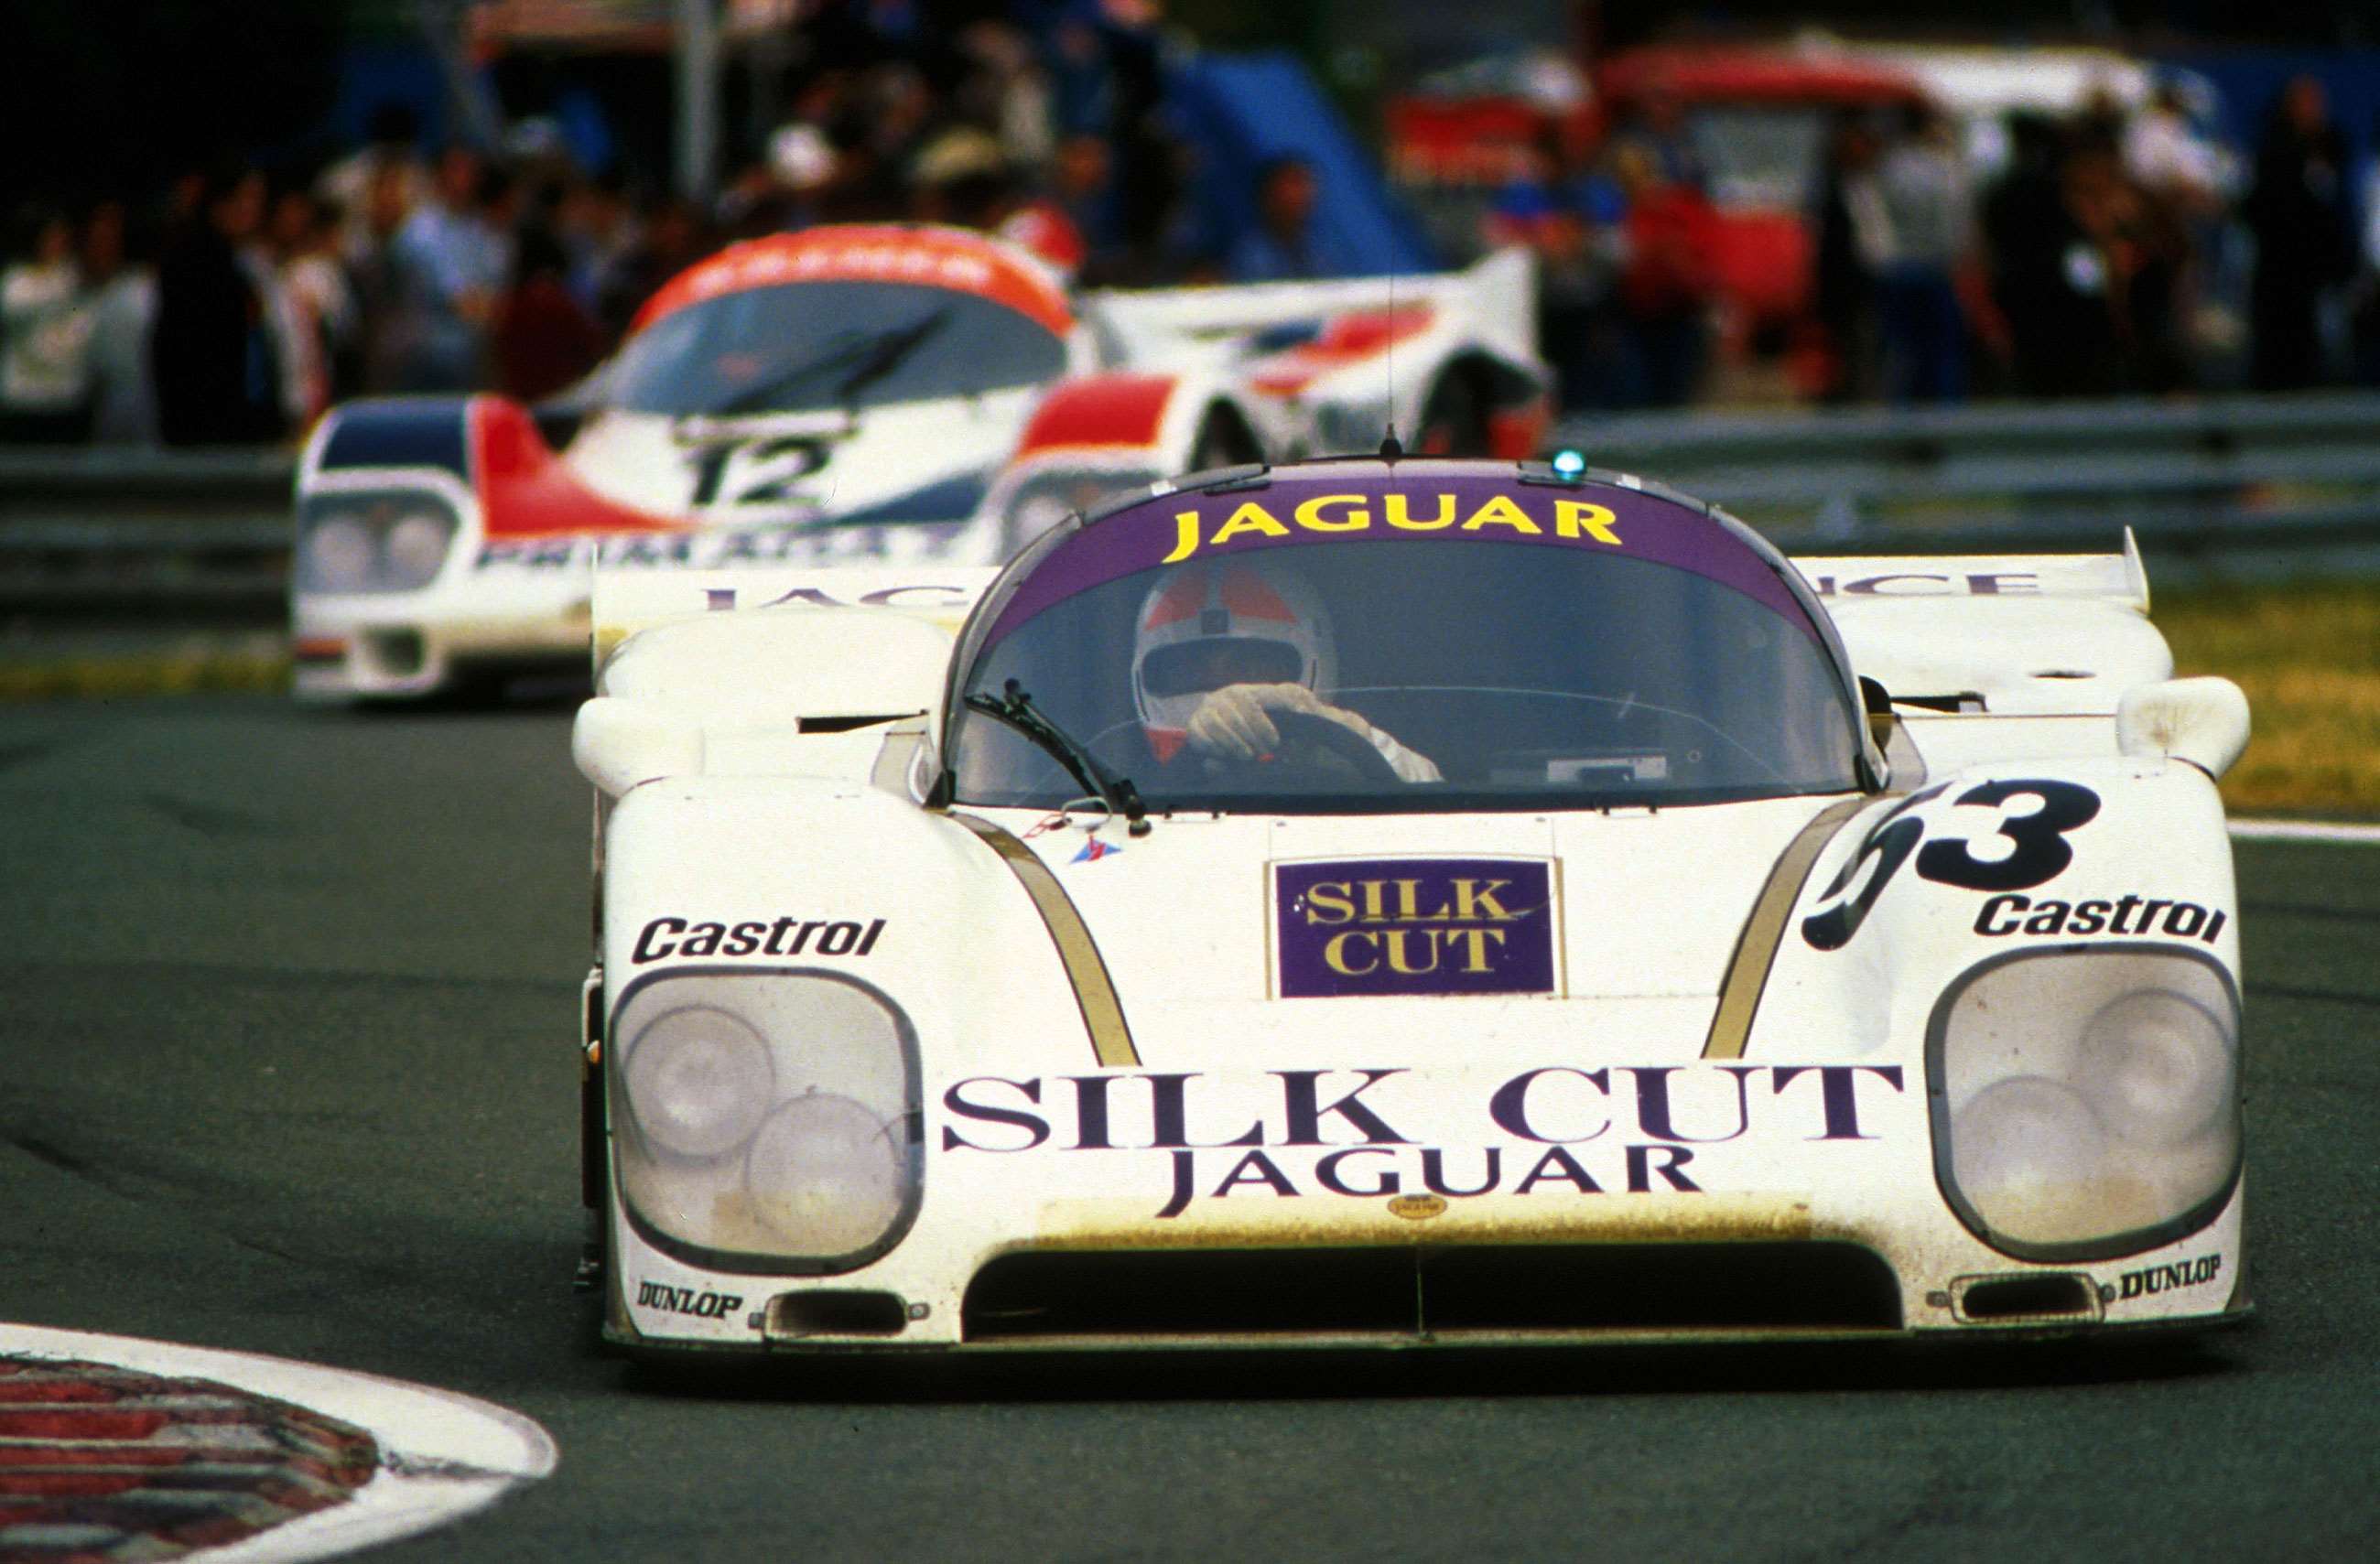 Making its Le Mans debut, the Jaguar XJR-6 of Gianfranco Brancatelli, Win Percy and Hurley Haywood, 1986.